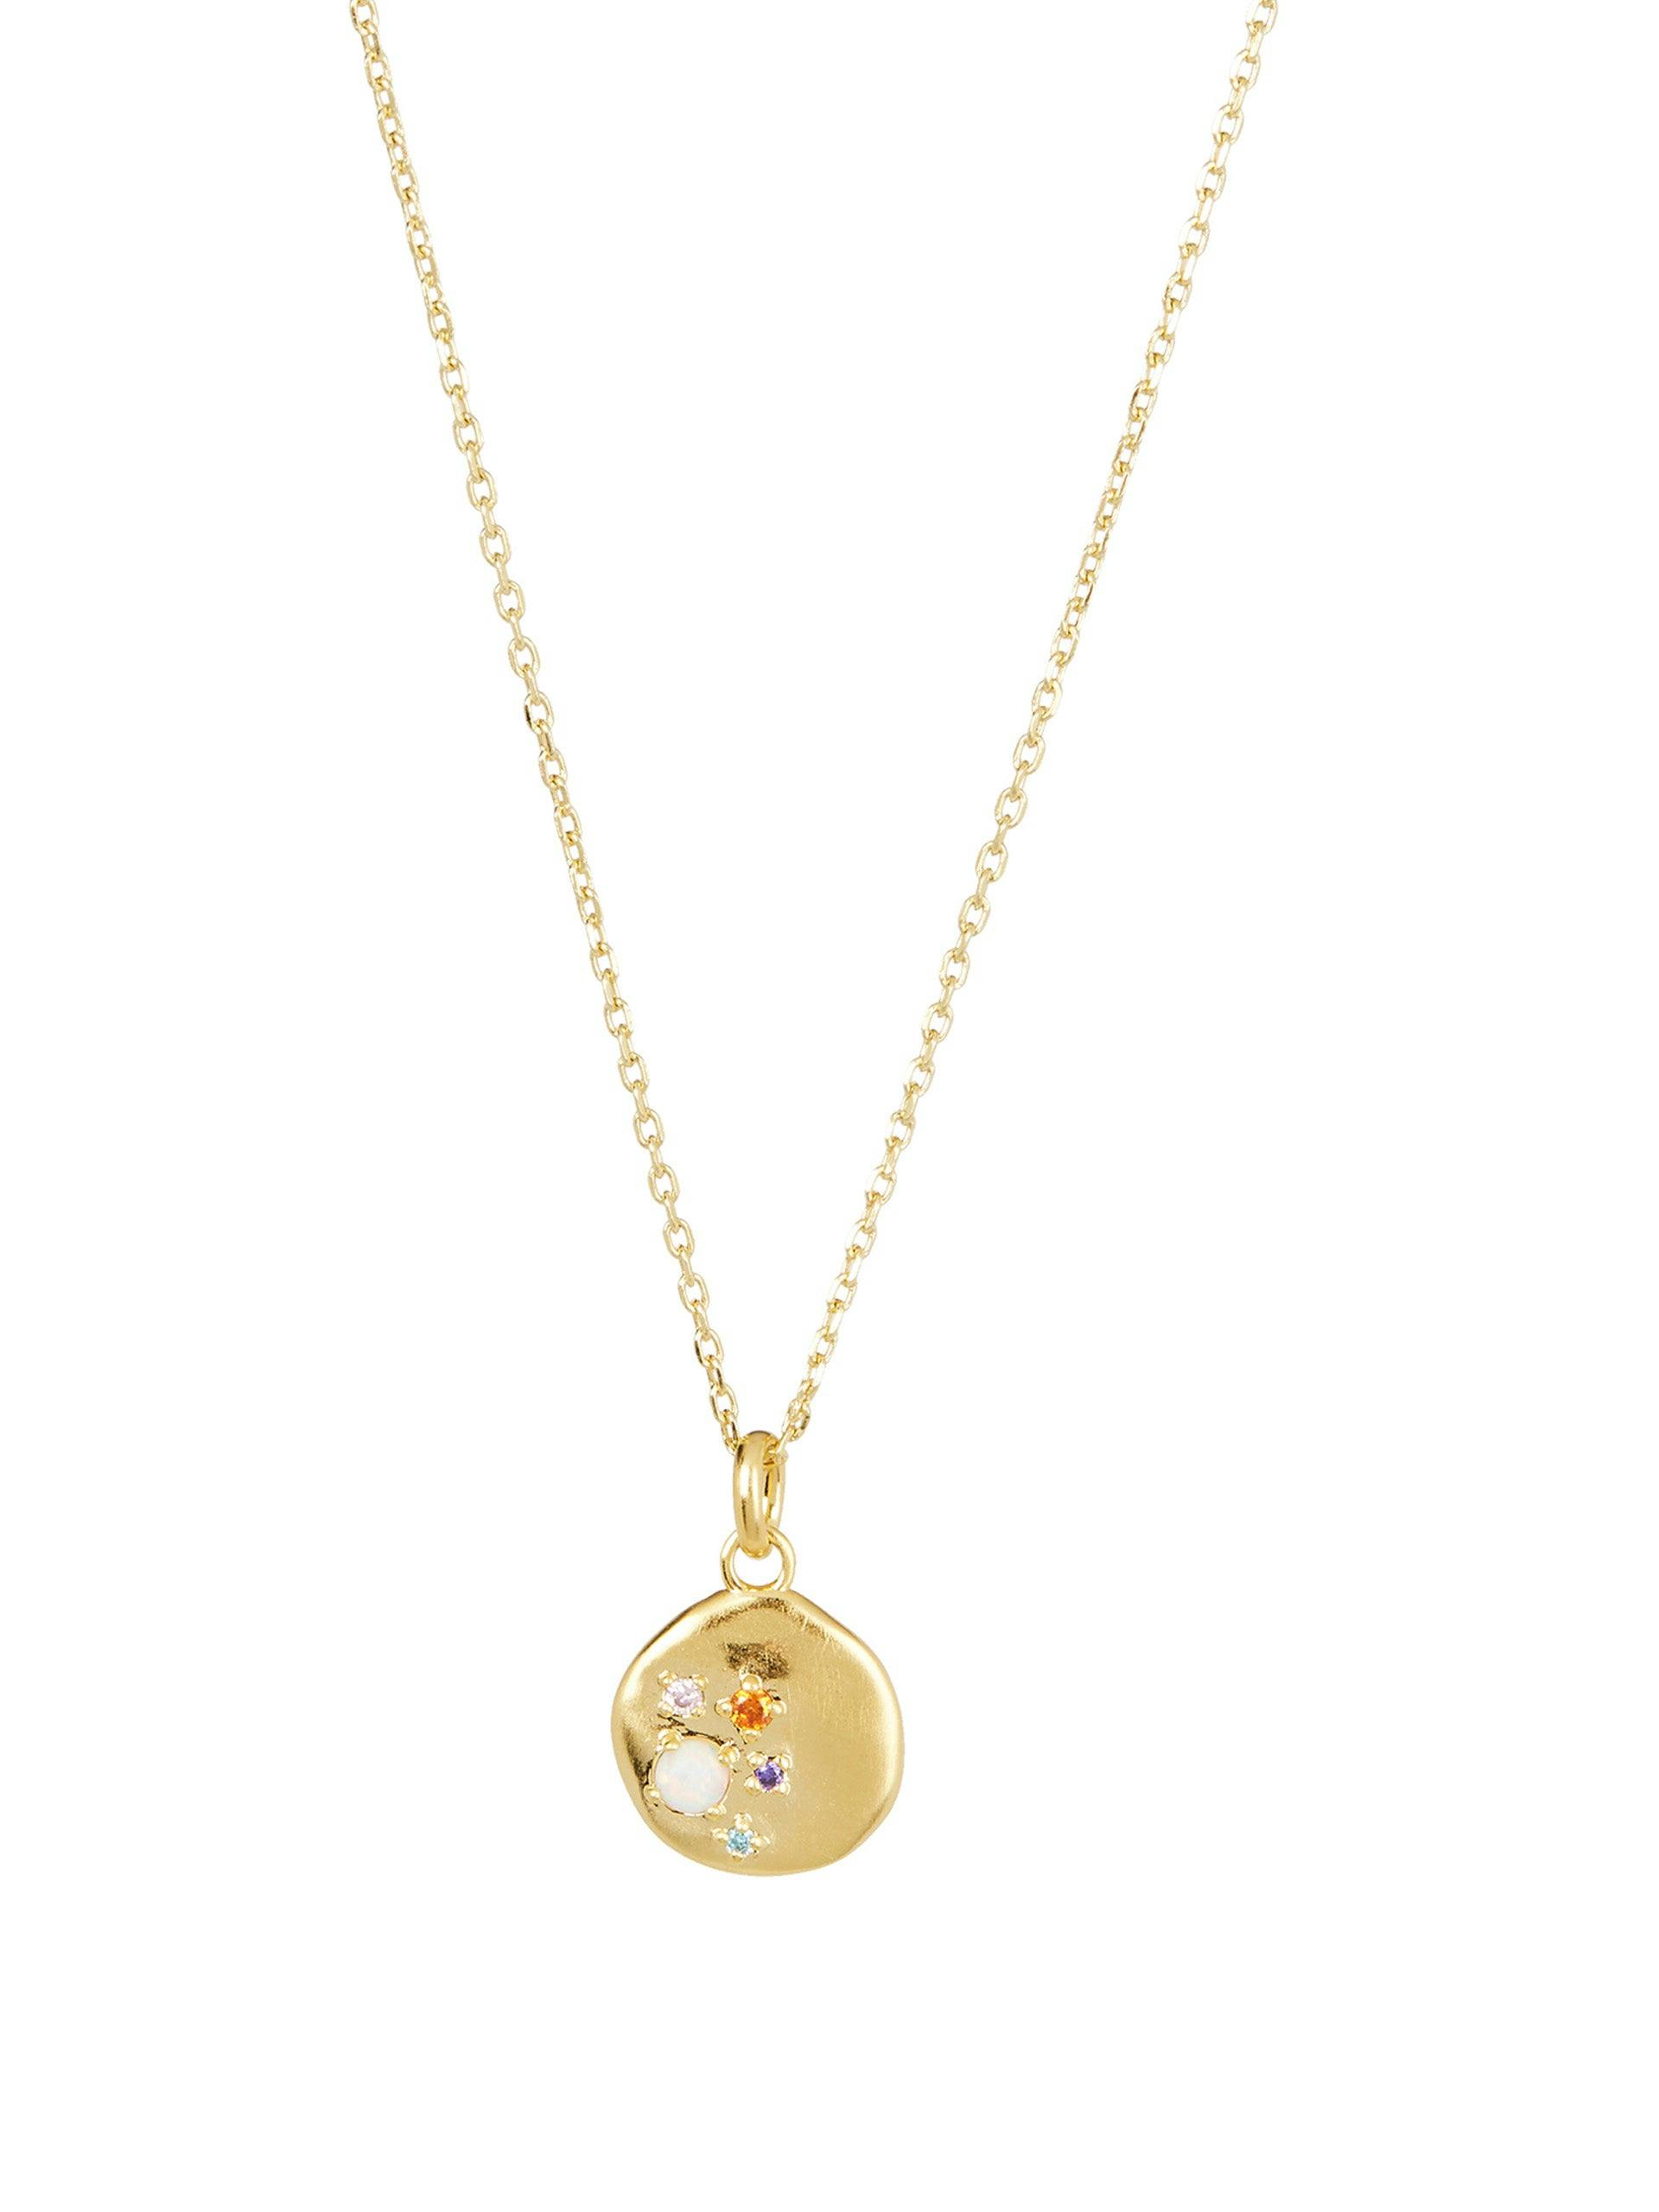 Brook opal disk charm gold plated pendant necklace